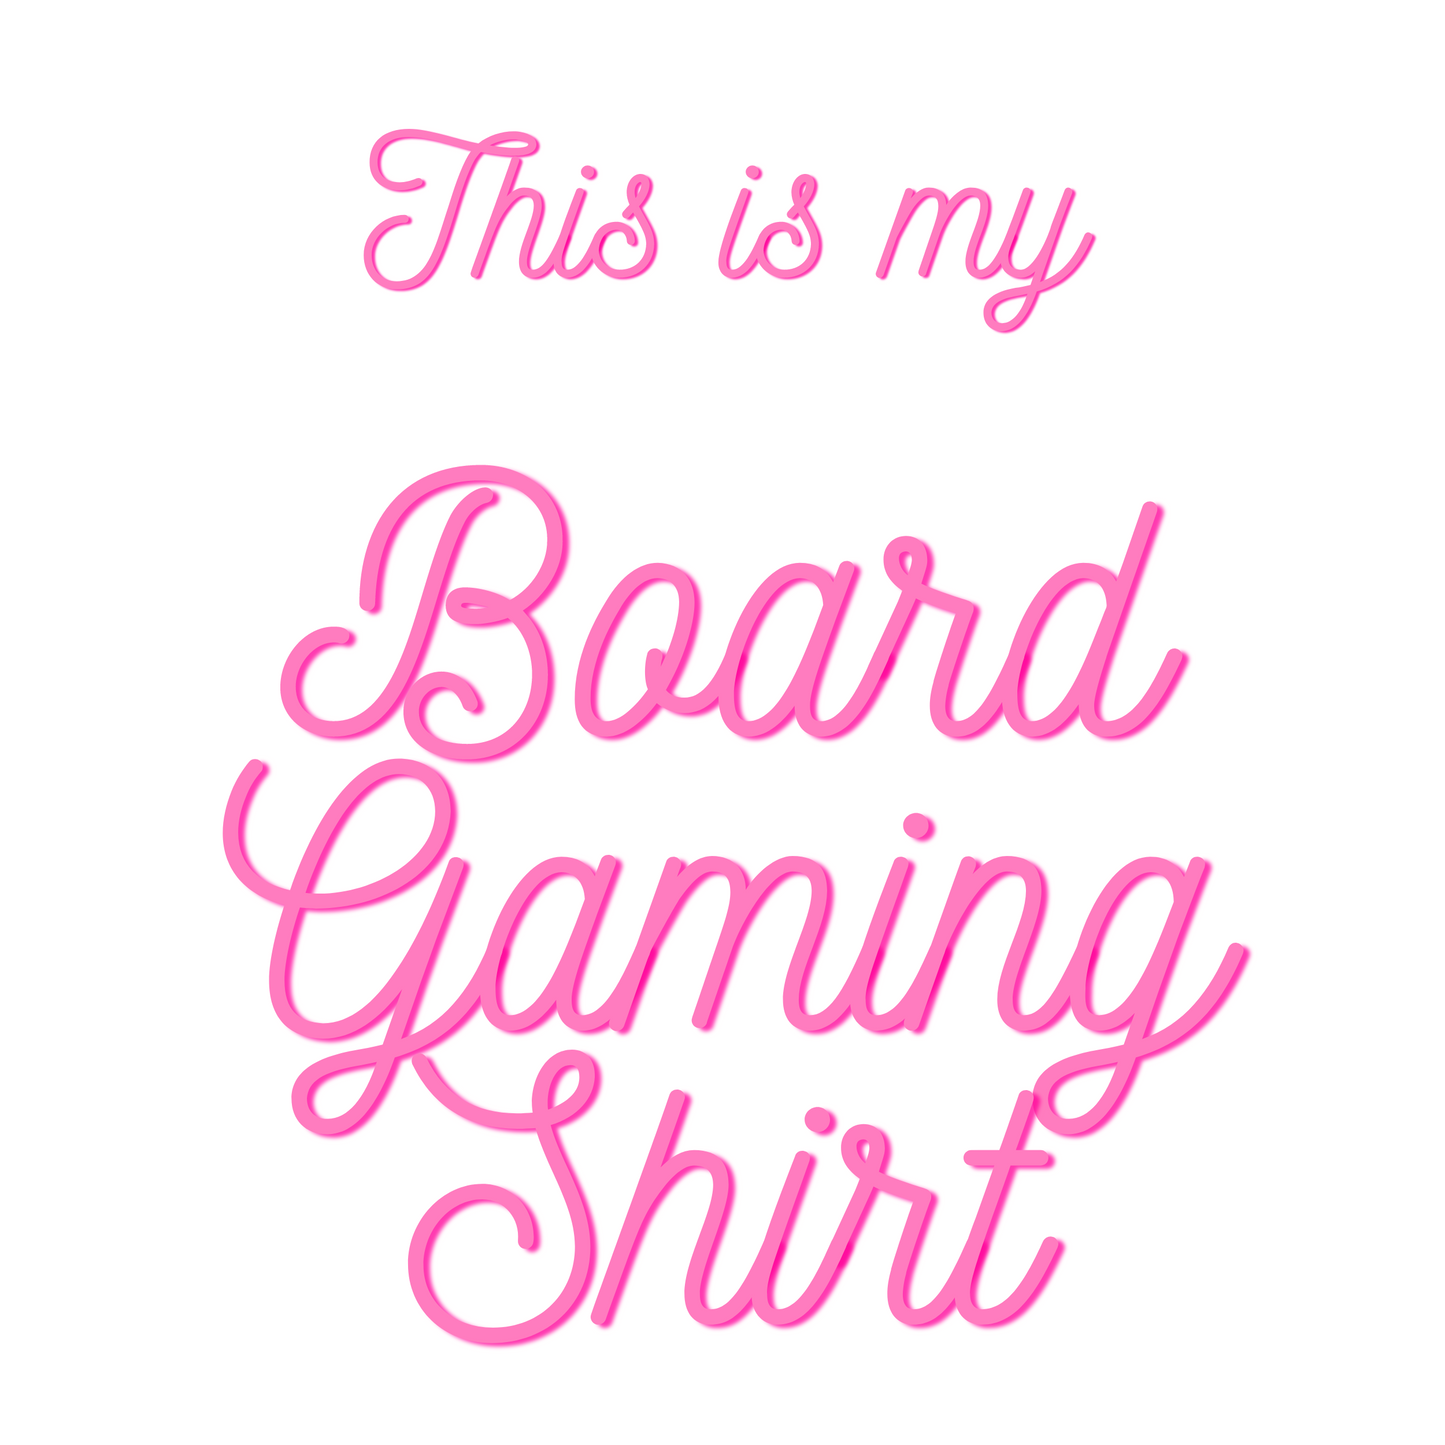 Board Game T Shirts - Slim fit - This is my Board Gaming Shirt